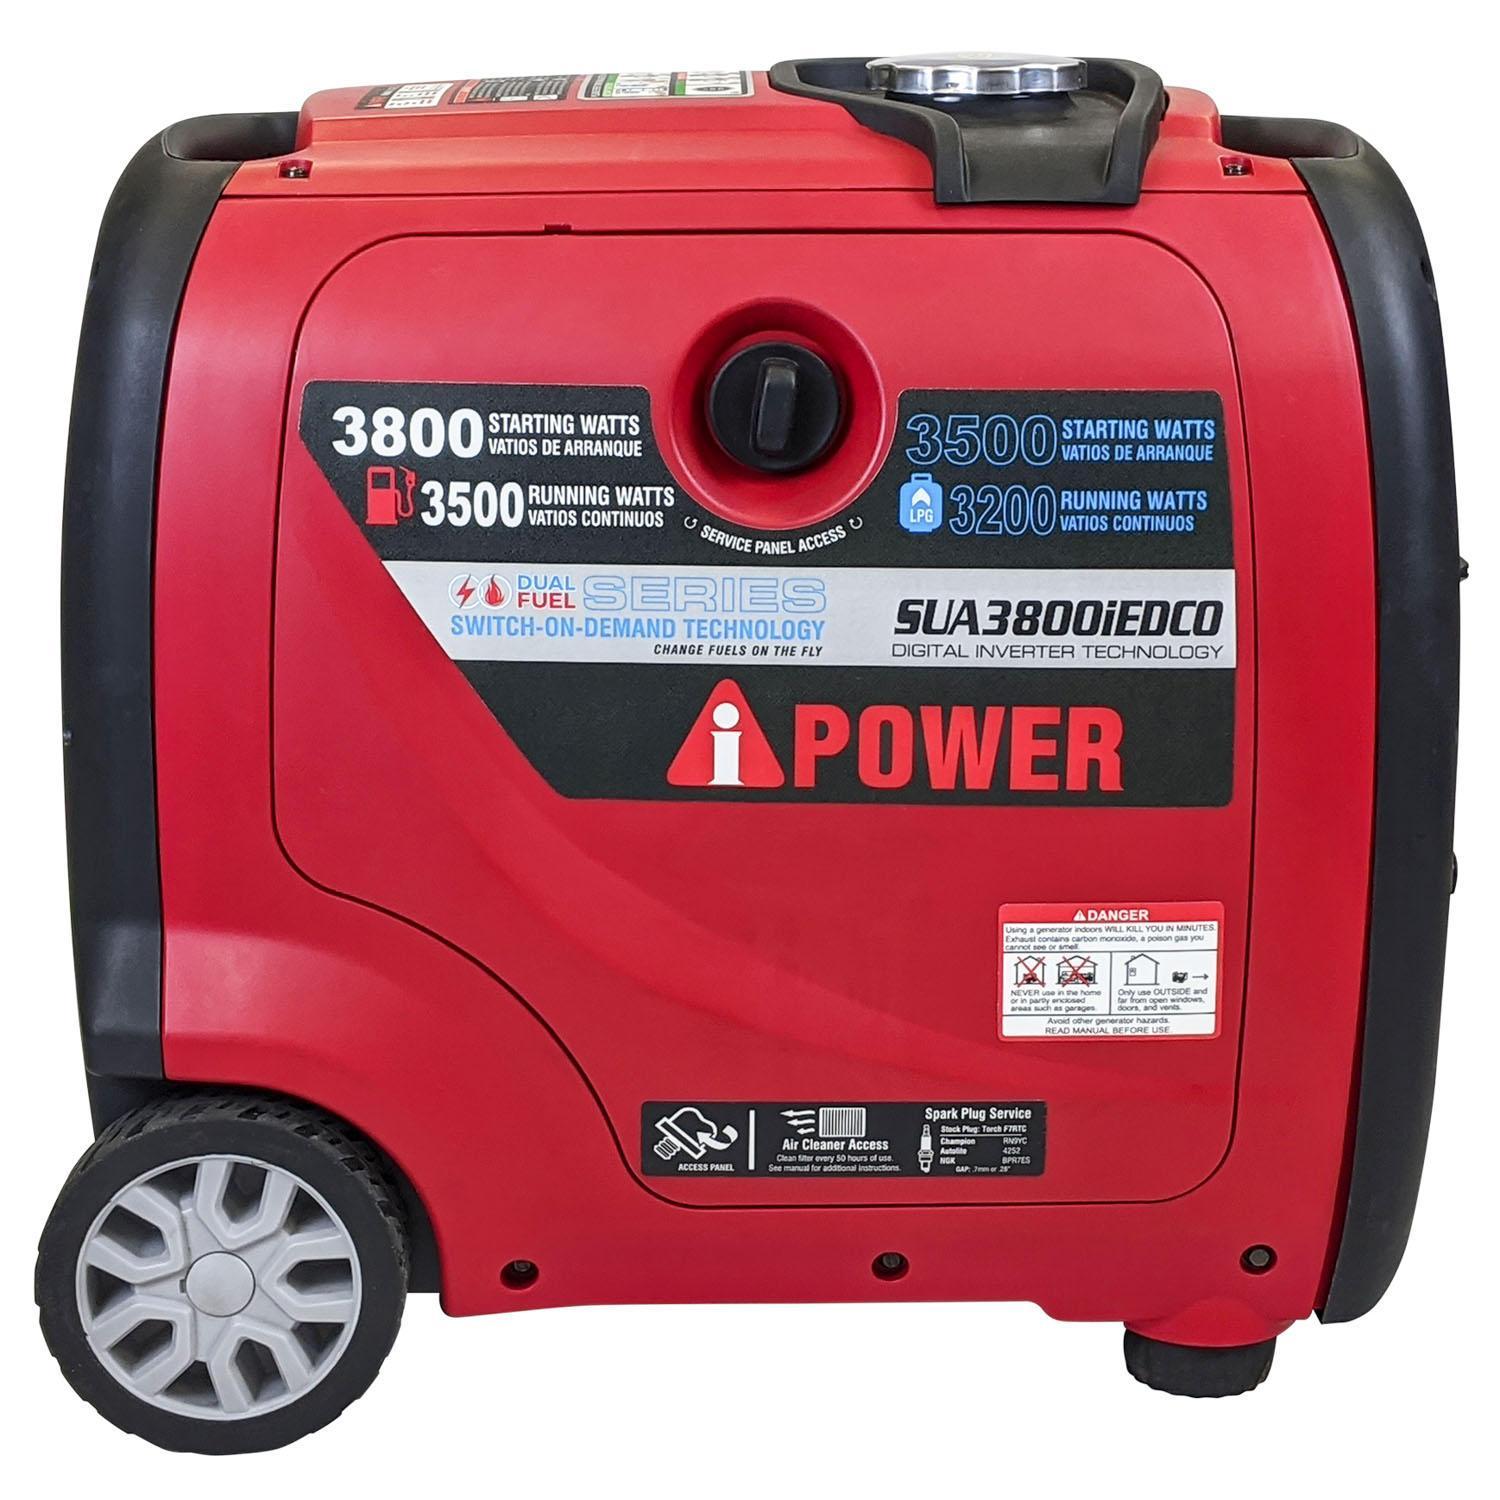 A-iPower SUA3800IED 3500W/3800W Dual Fuel Remote Start Inverter Generator New